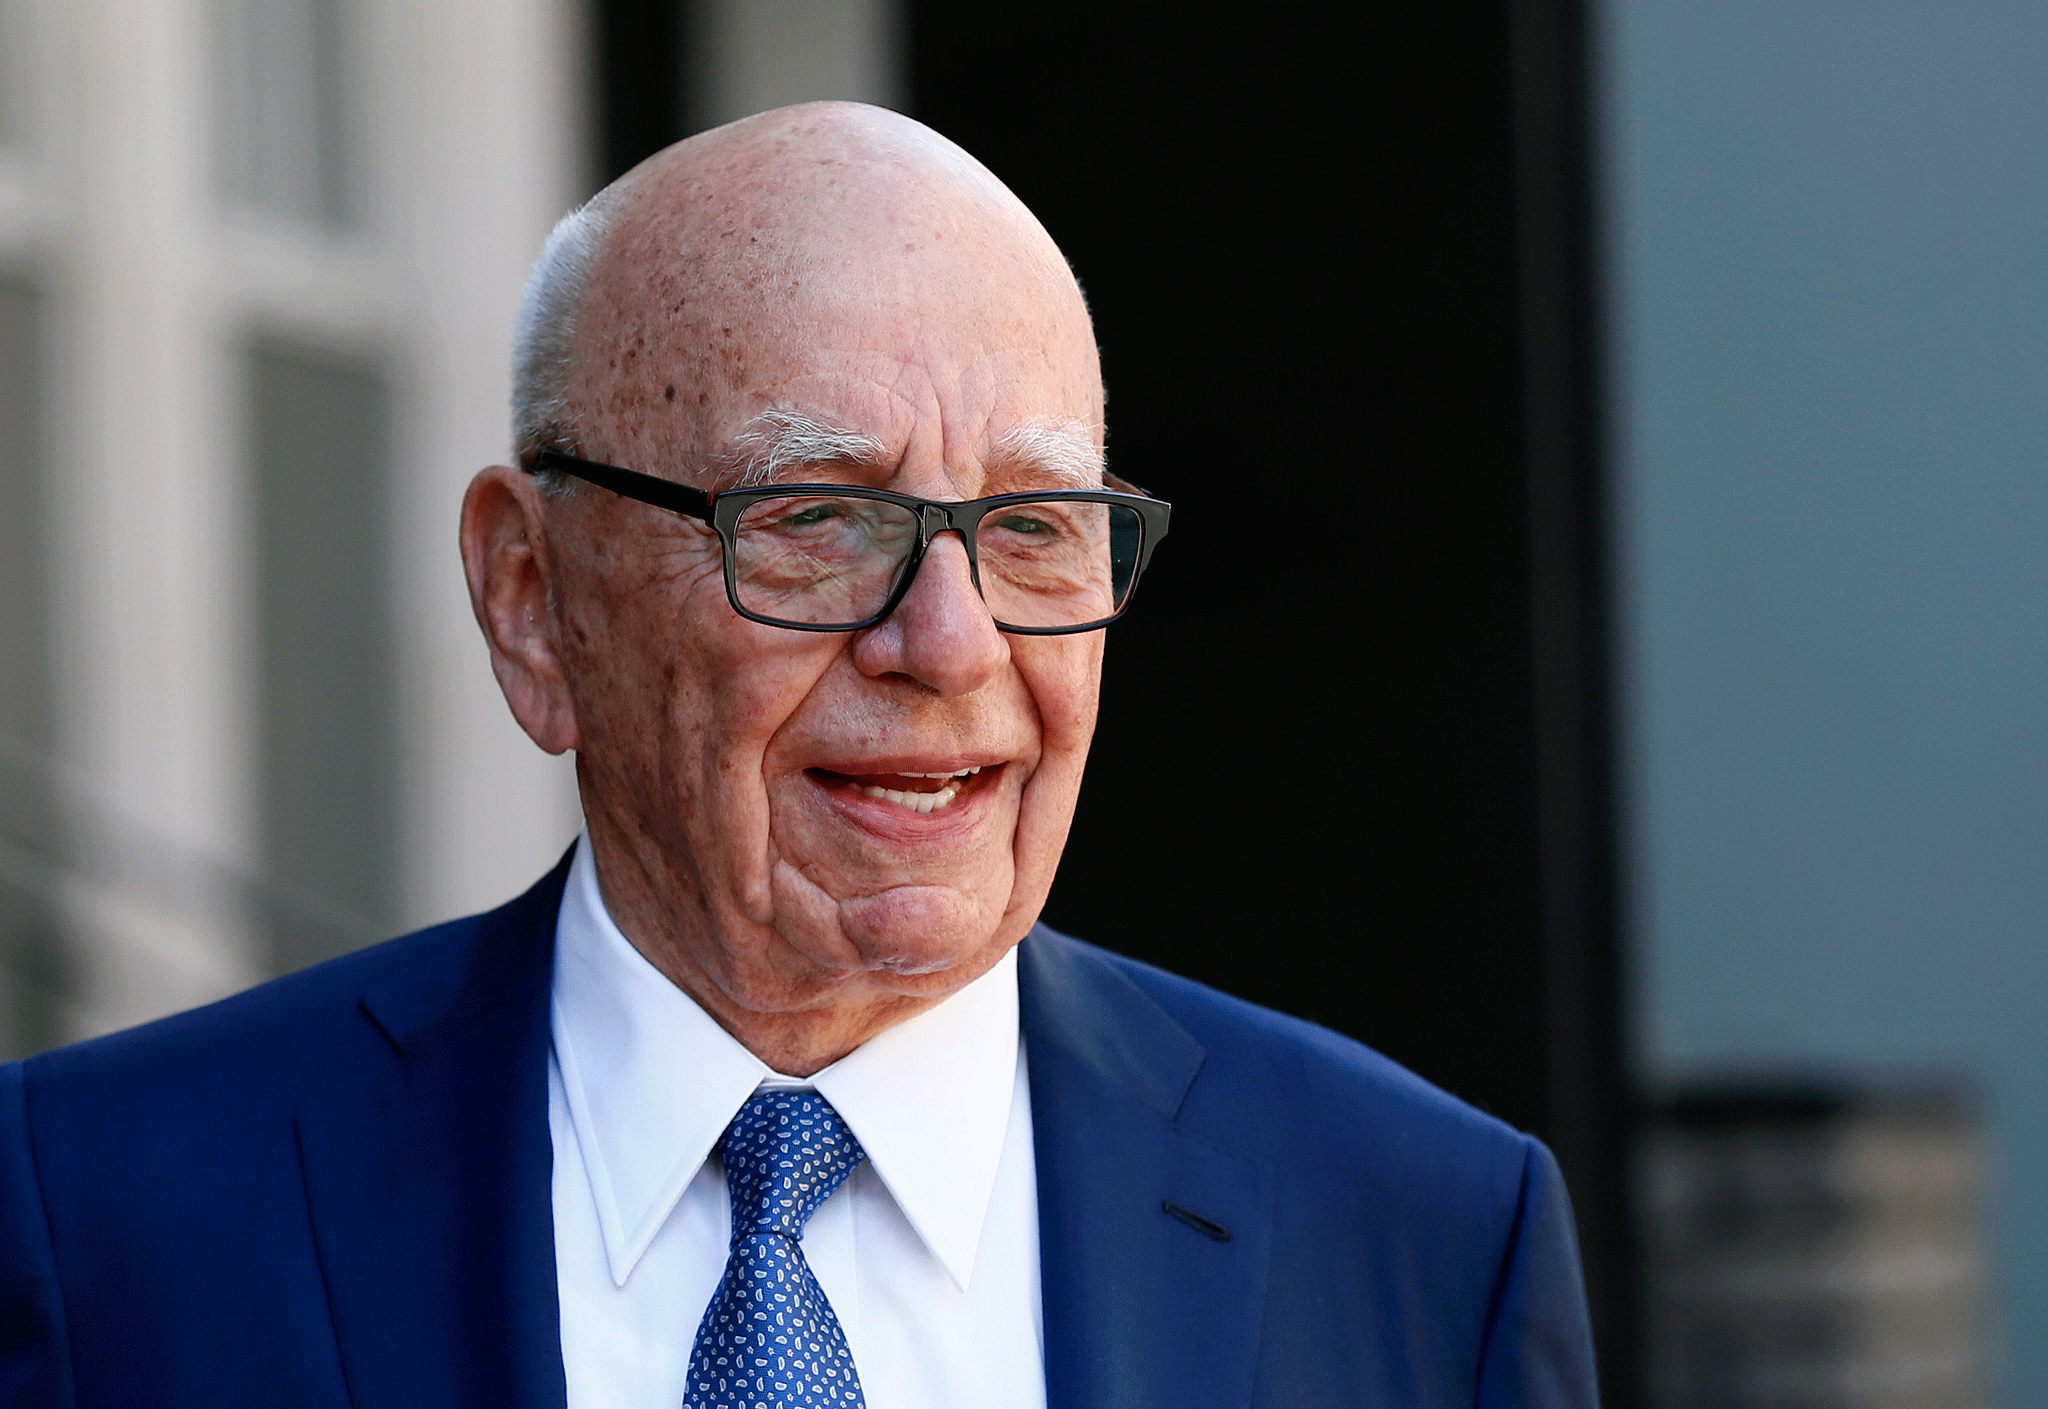 Foreign buyers, such as Rupert Murdoch’s Twenty-First Century Fox, were shopping with dollars for bargains while domestic UK-to-UK dealmaking fell off sharply